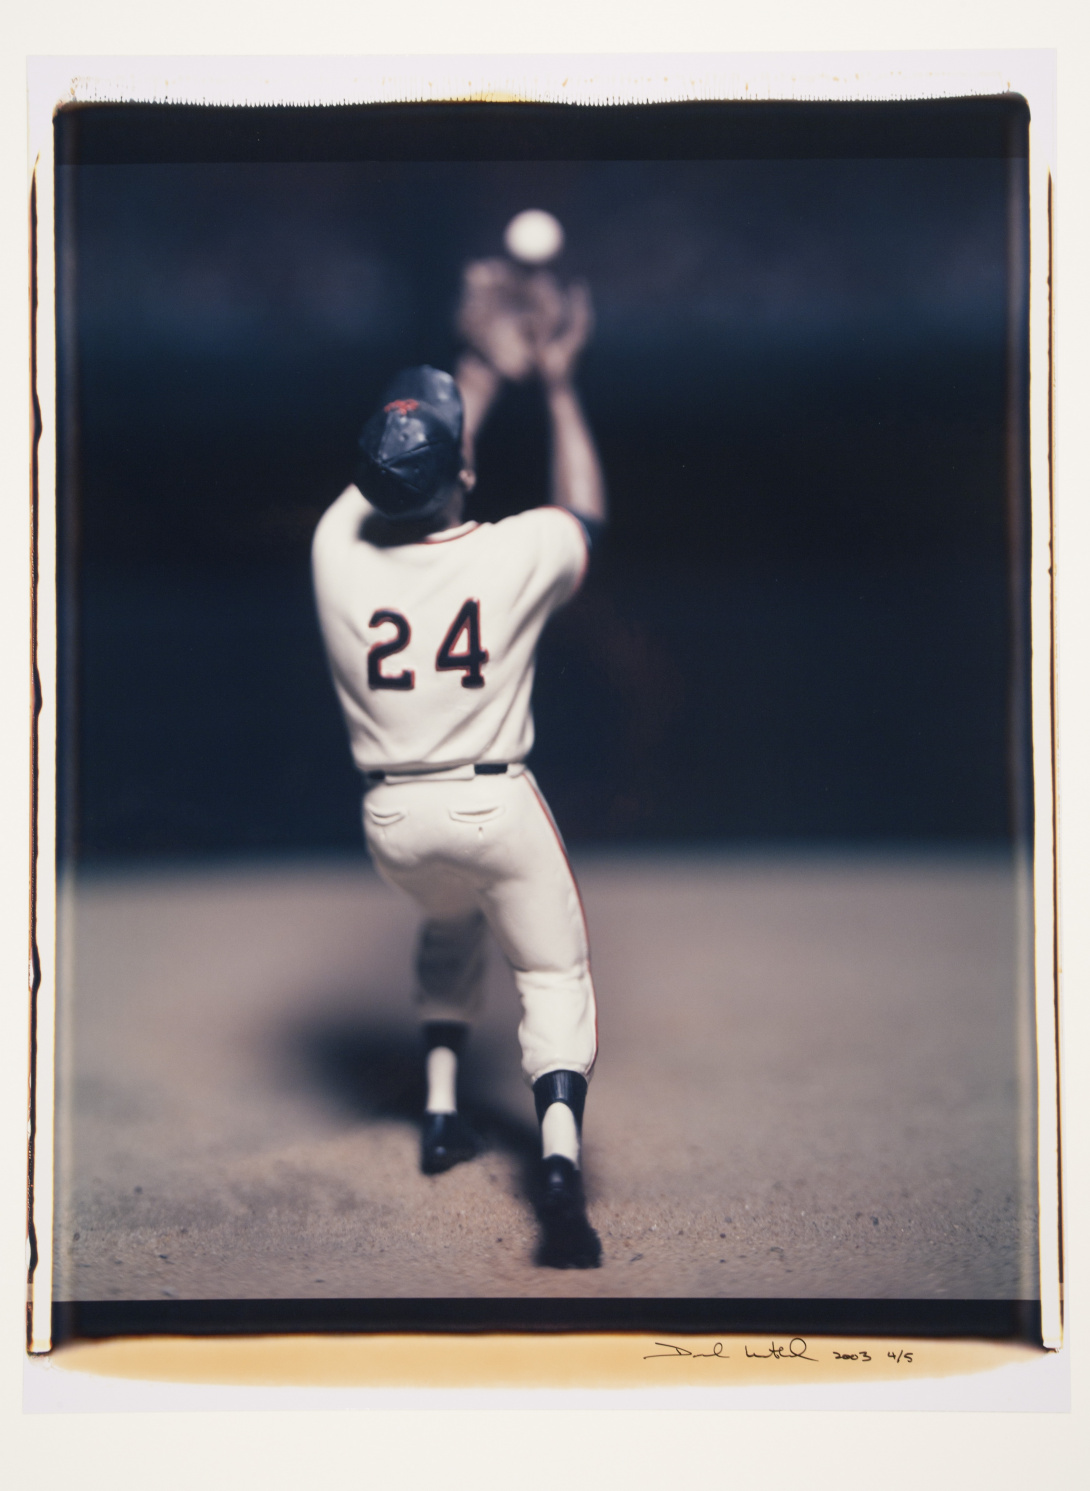 A photograph that shows the back of Willie Mays—he is wearing his jersey with #24 on it—in motion catching a baseball. The image is against a dark background and his arms, glove, and baseball are out of focus.